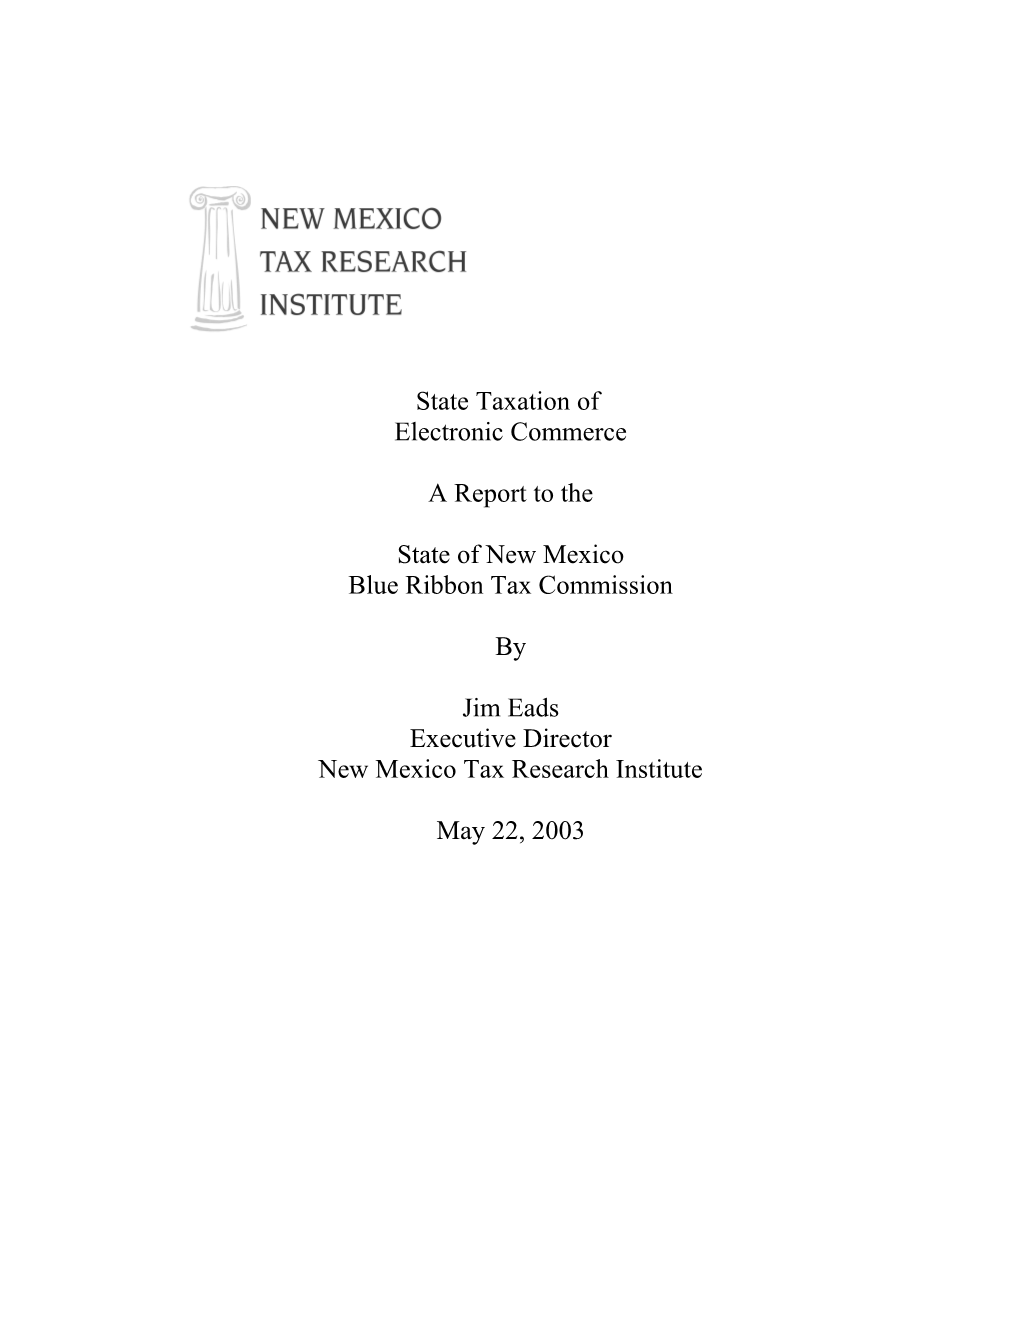 The New Mexico Tax Research Institute (NMTRI) Was Organized As a Non-Profit Public Policy